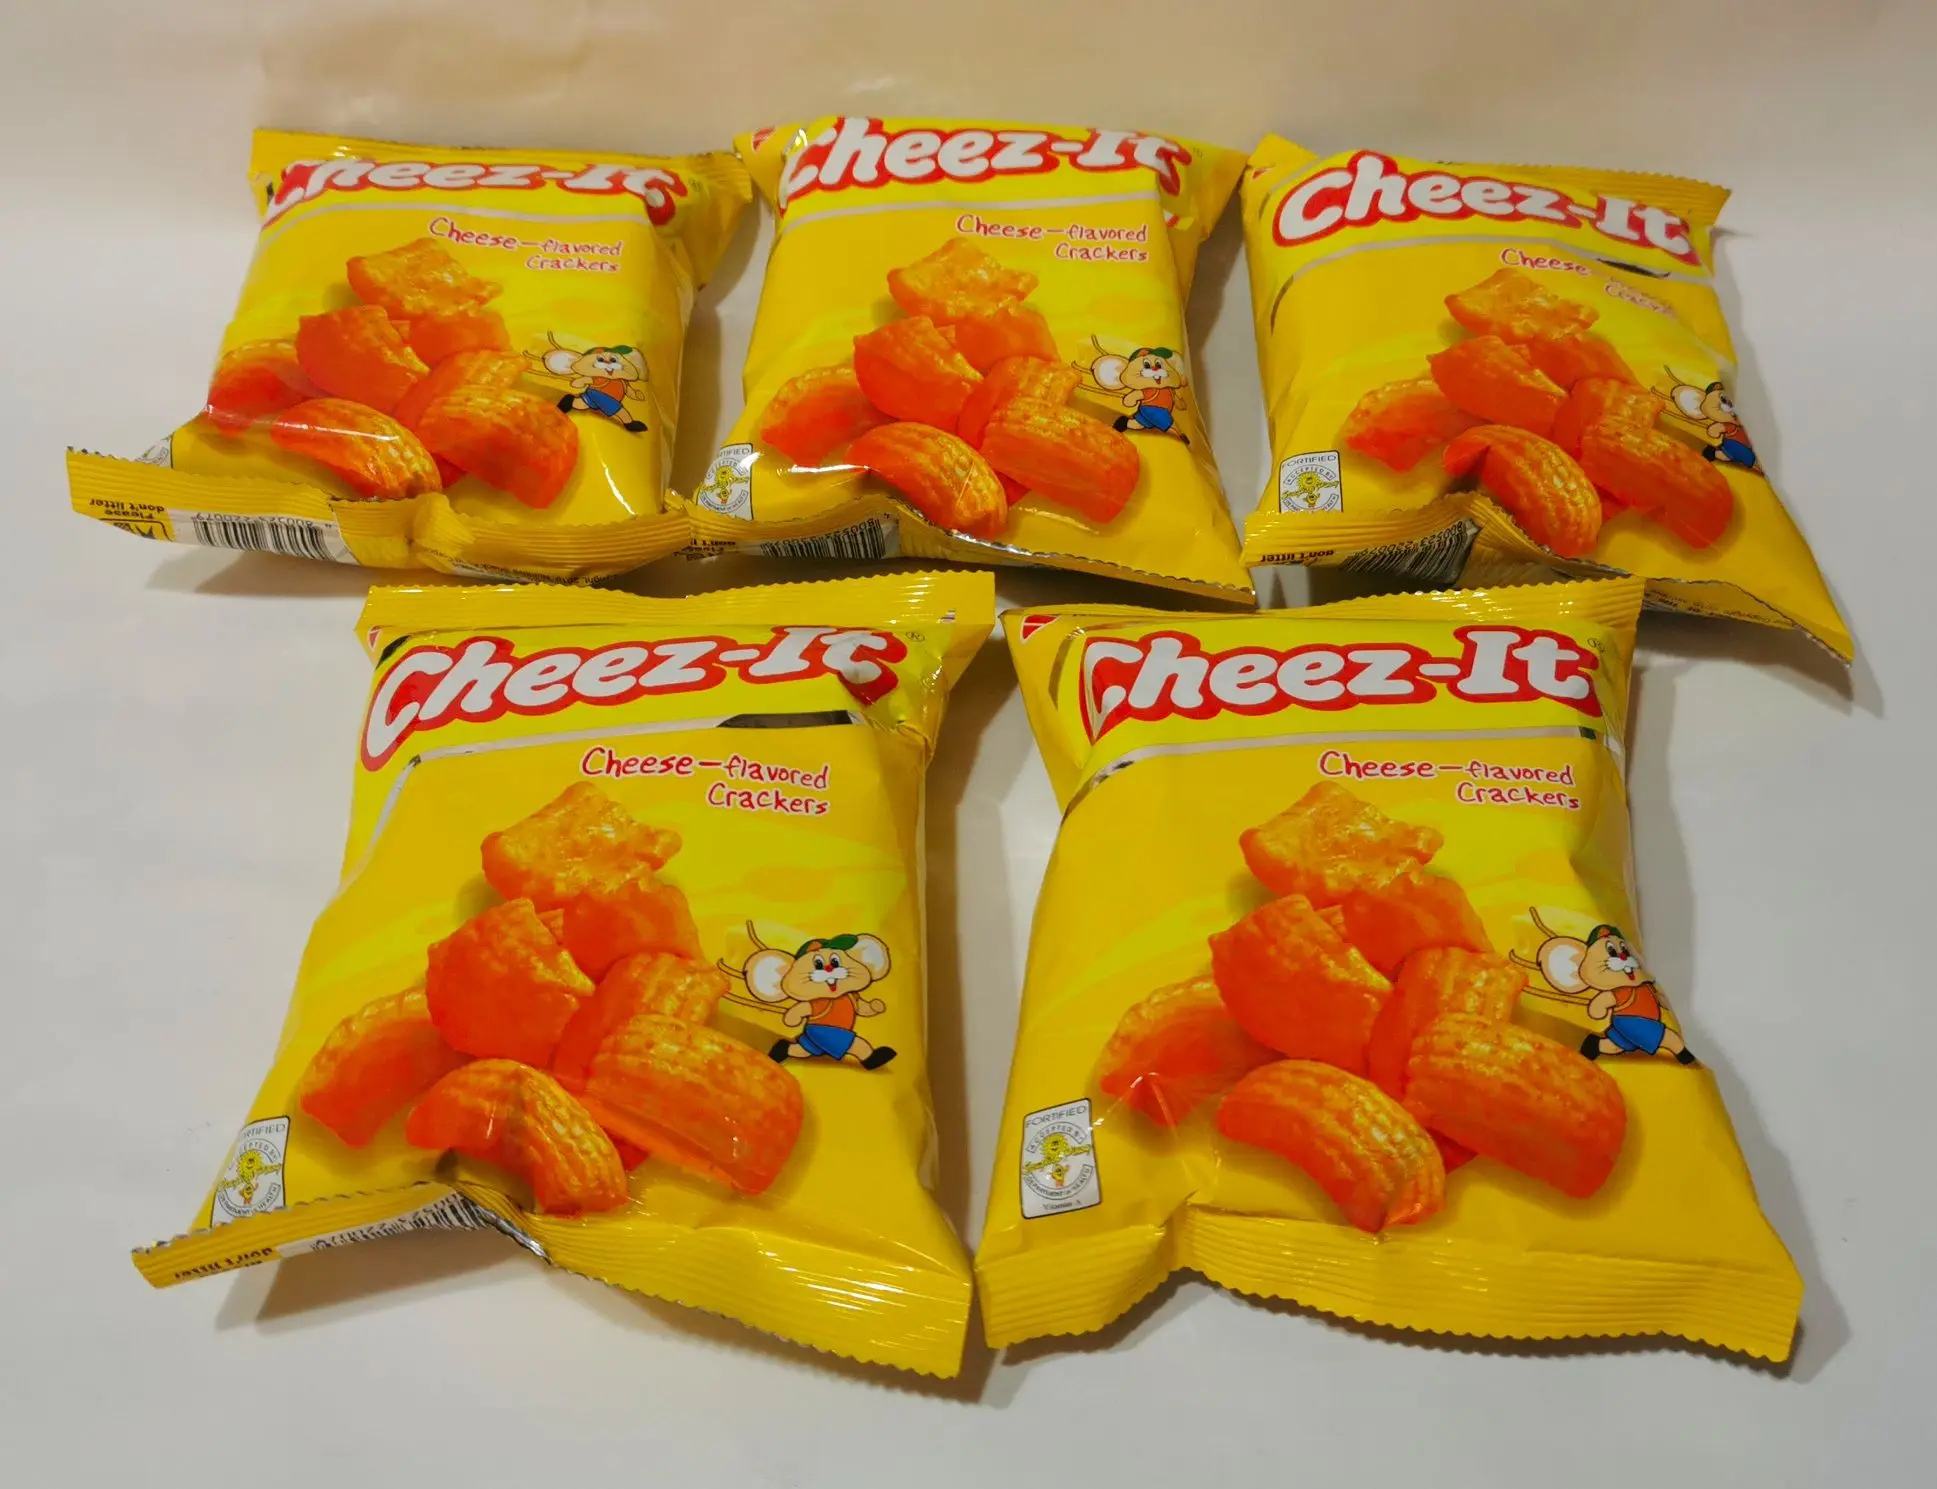 5 Packs of Cheez-it Cheese Flavored Snack (25g)